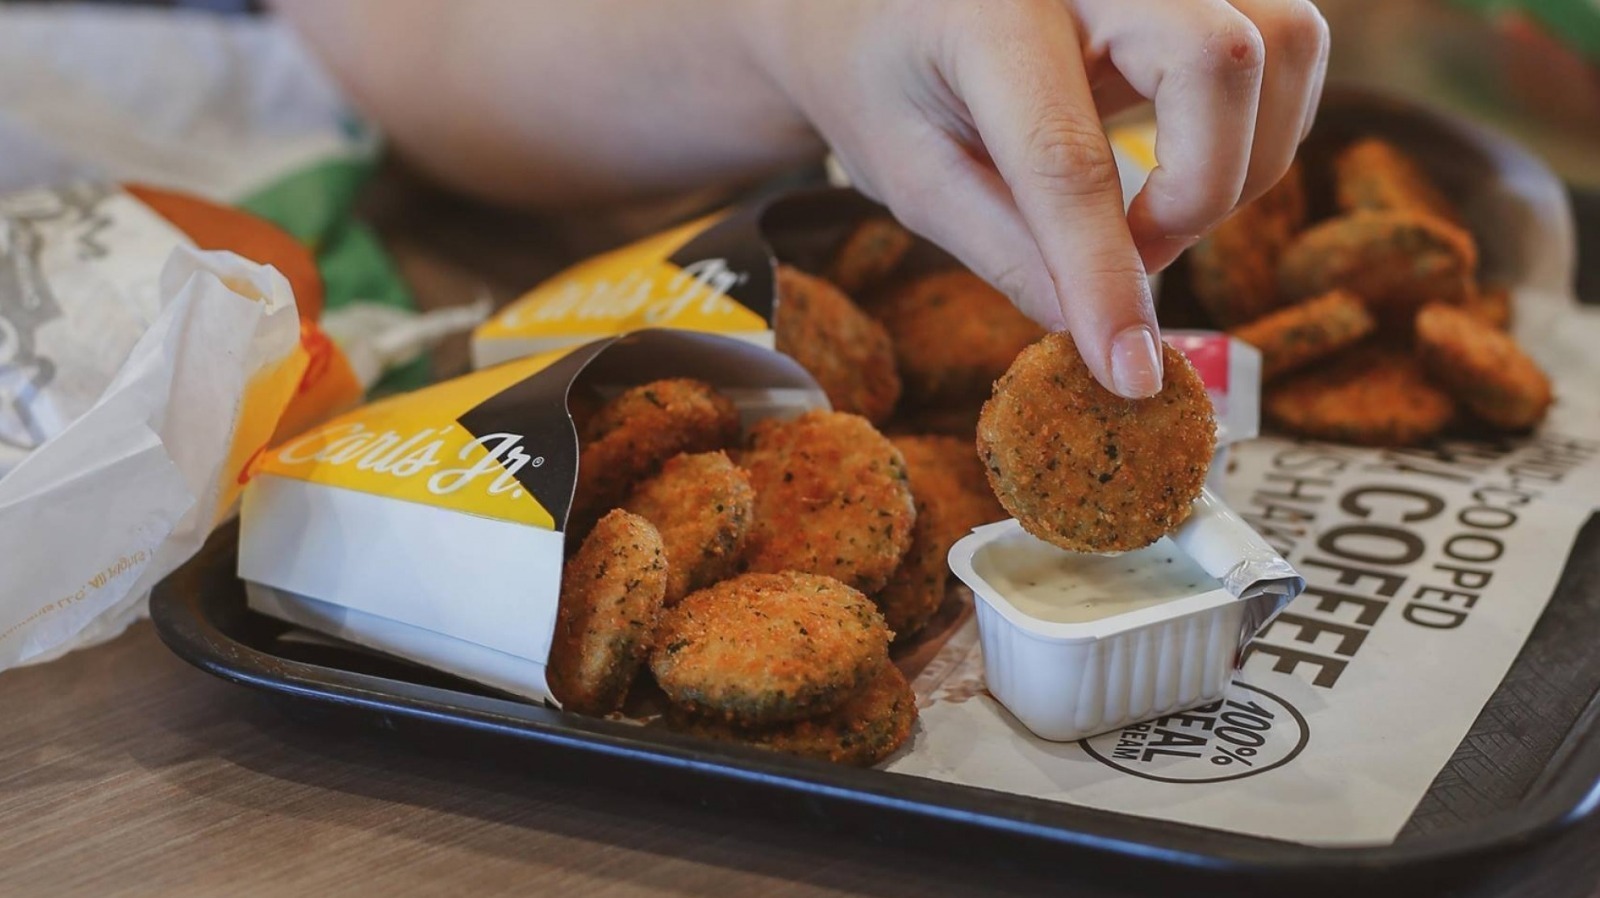 You May Want To Think Twice Before Ordering Fried Zucchini At Carl's Jr.